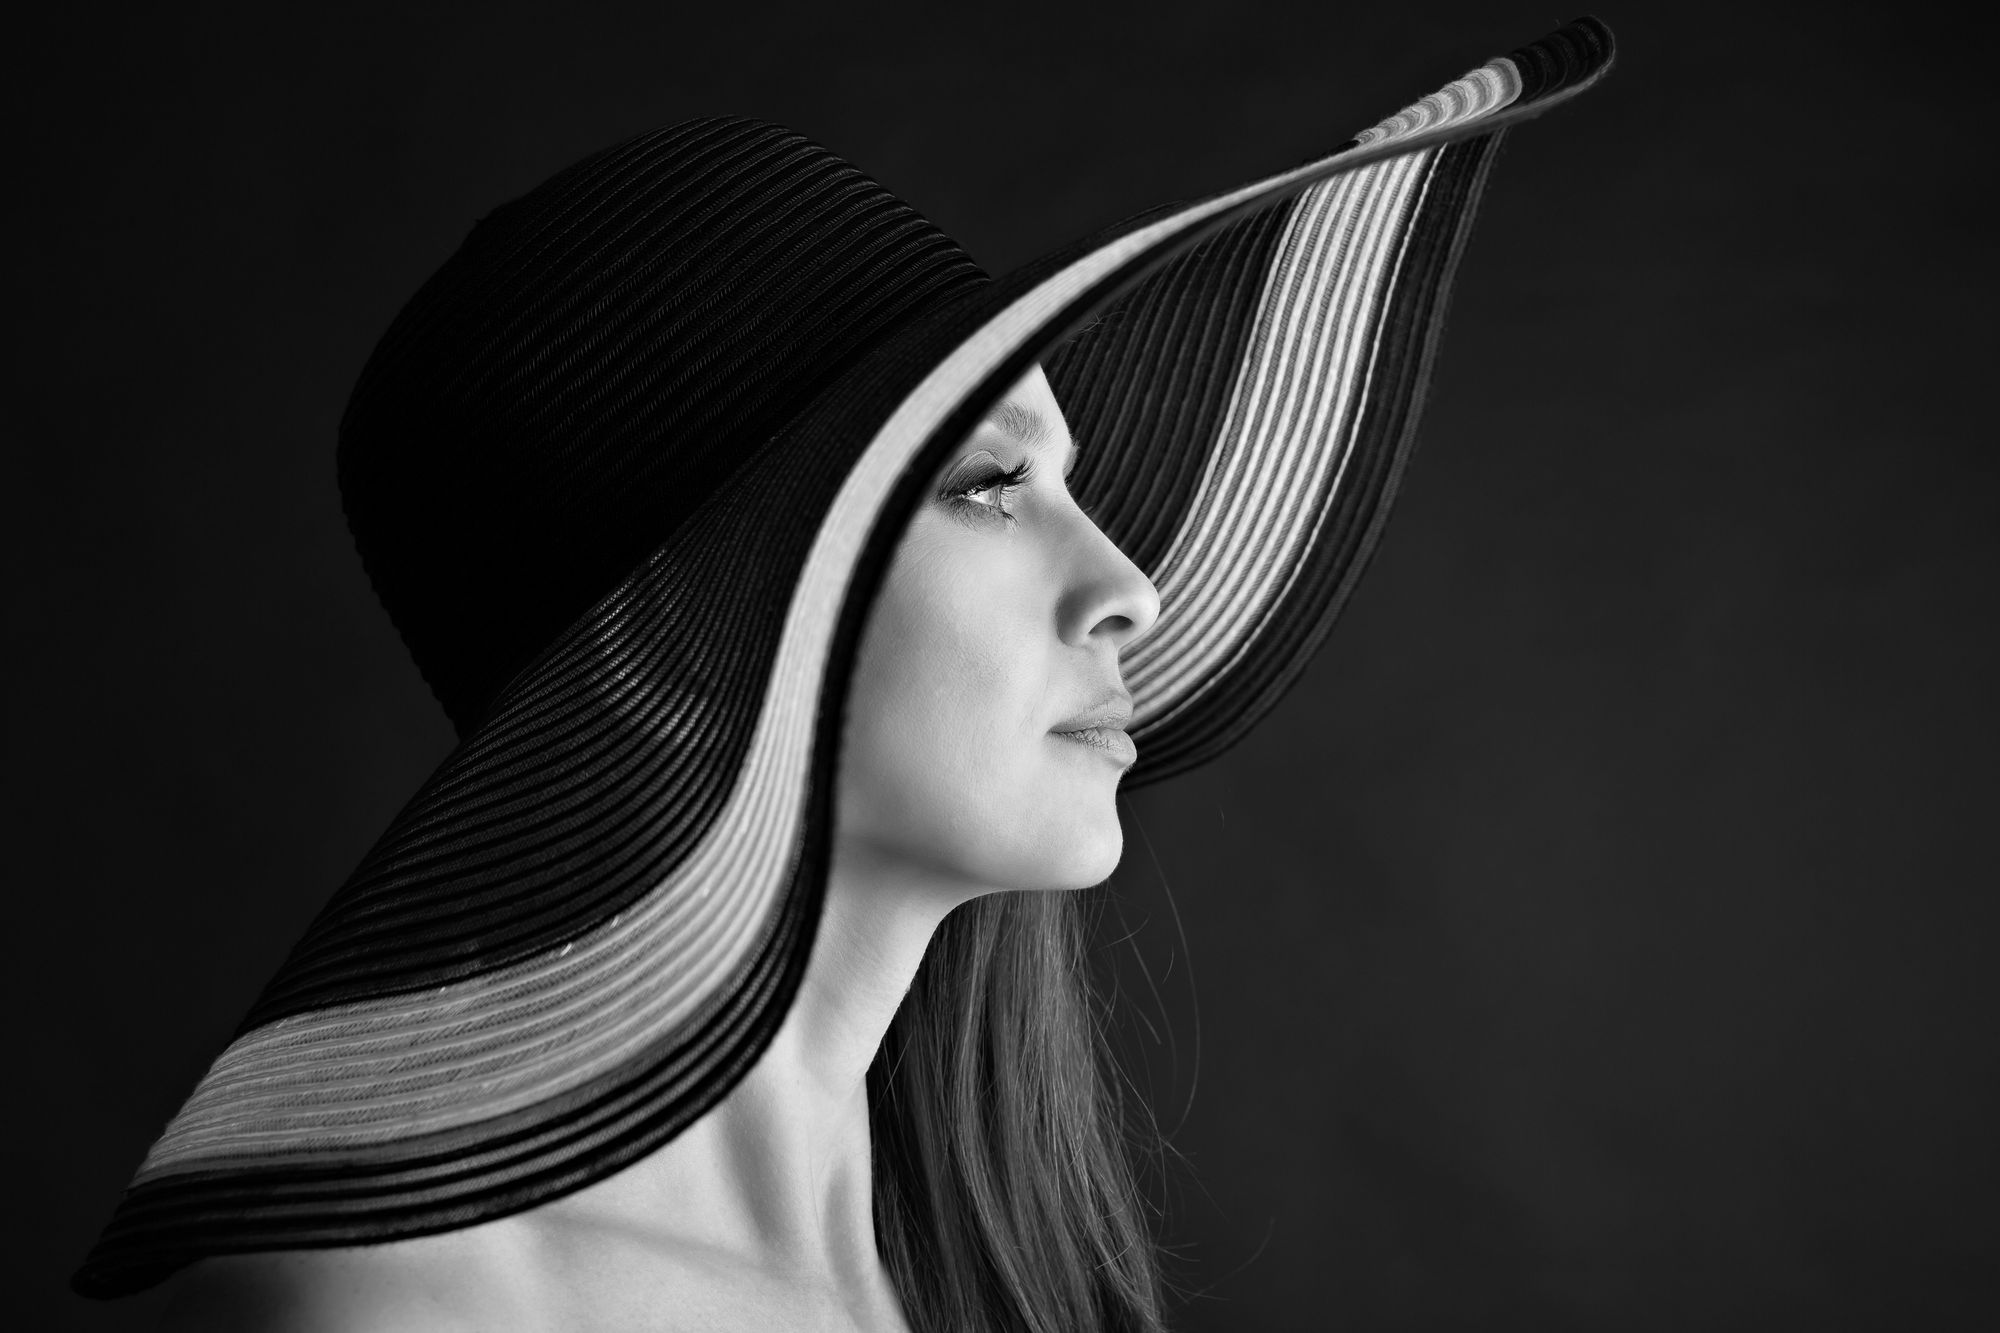 Women with the hat